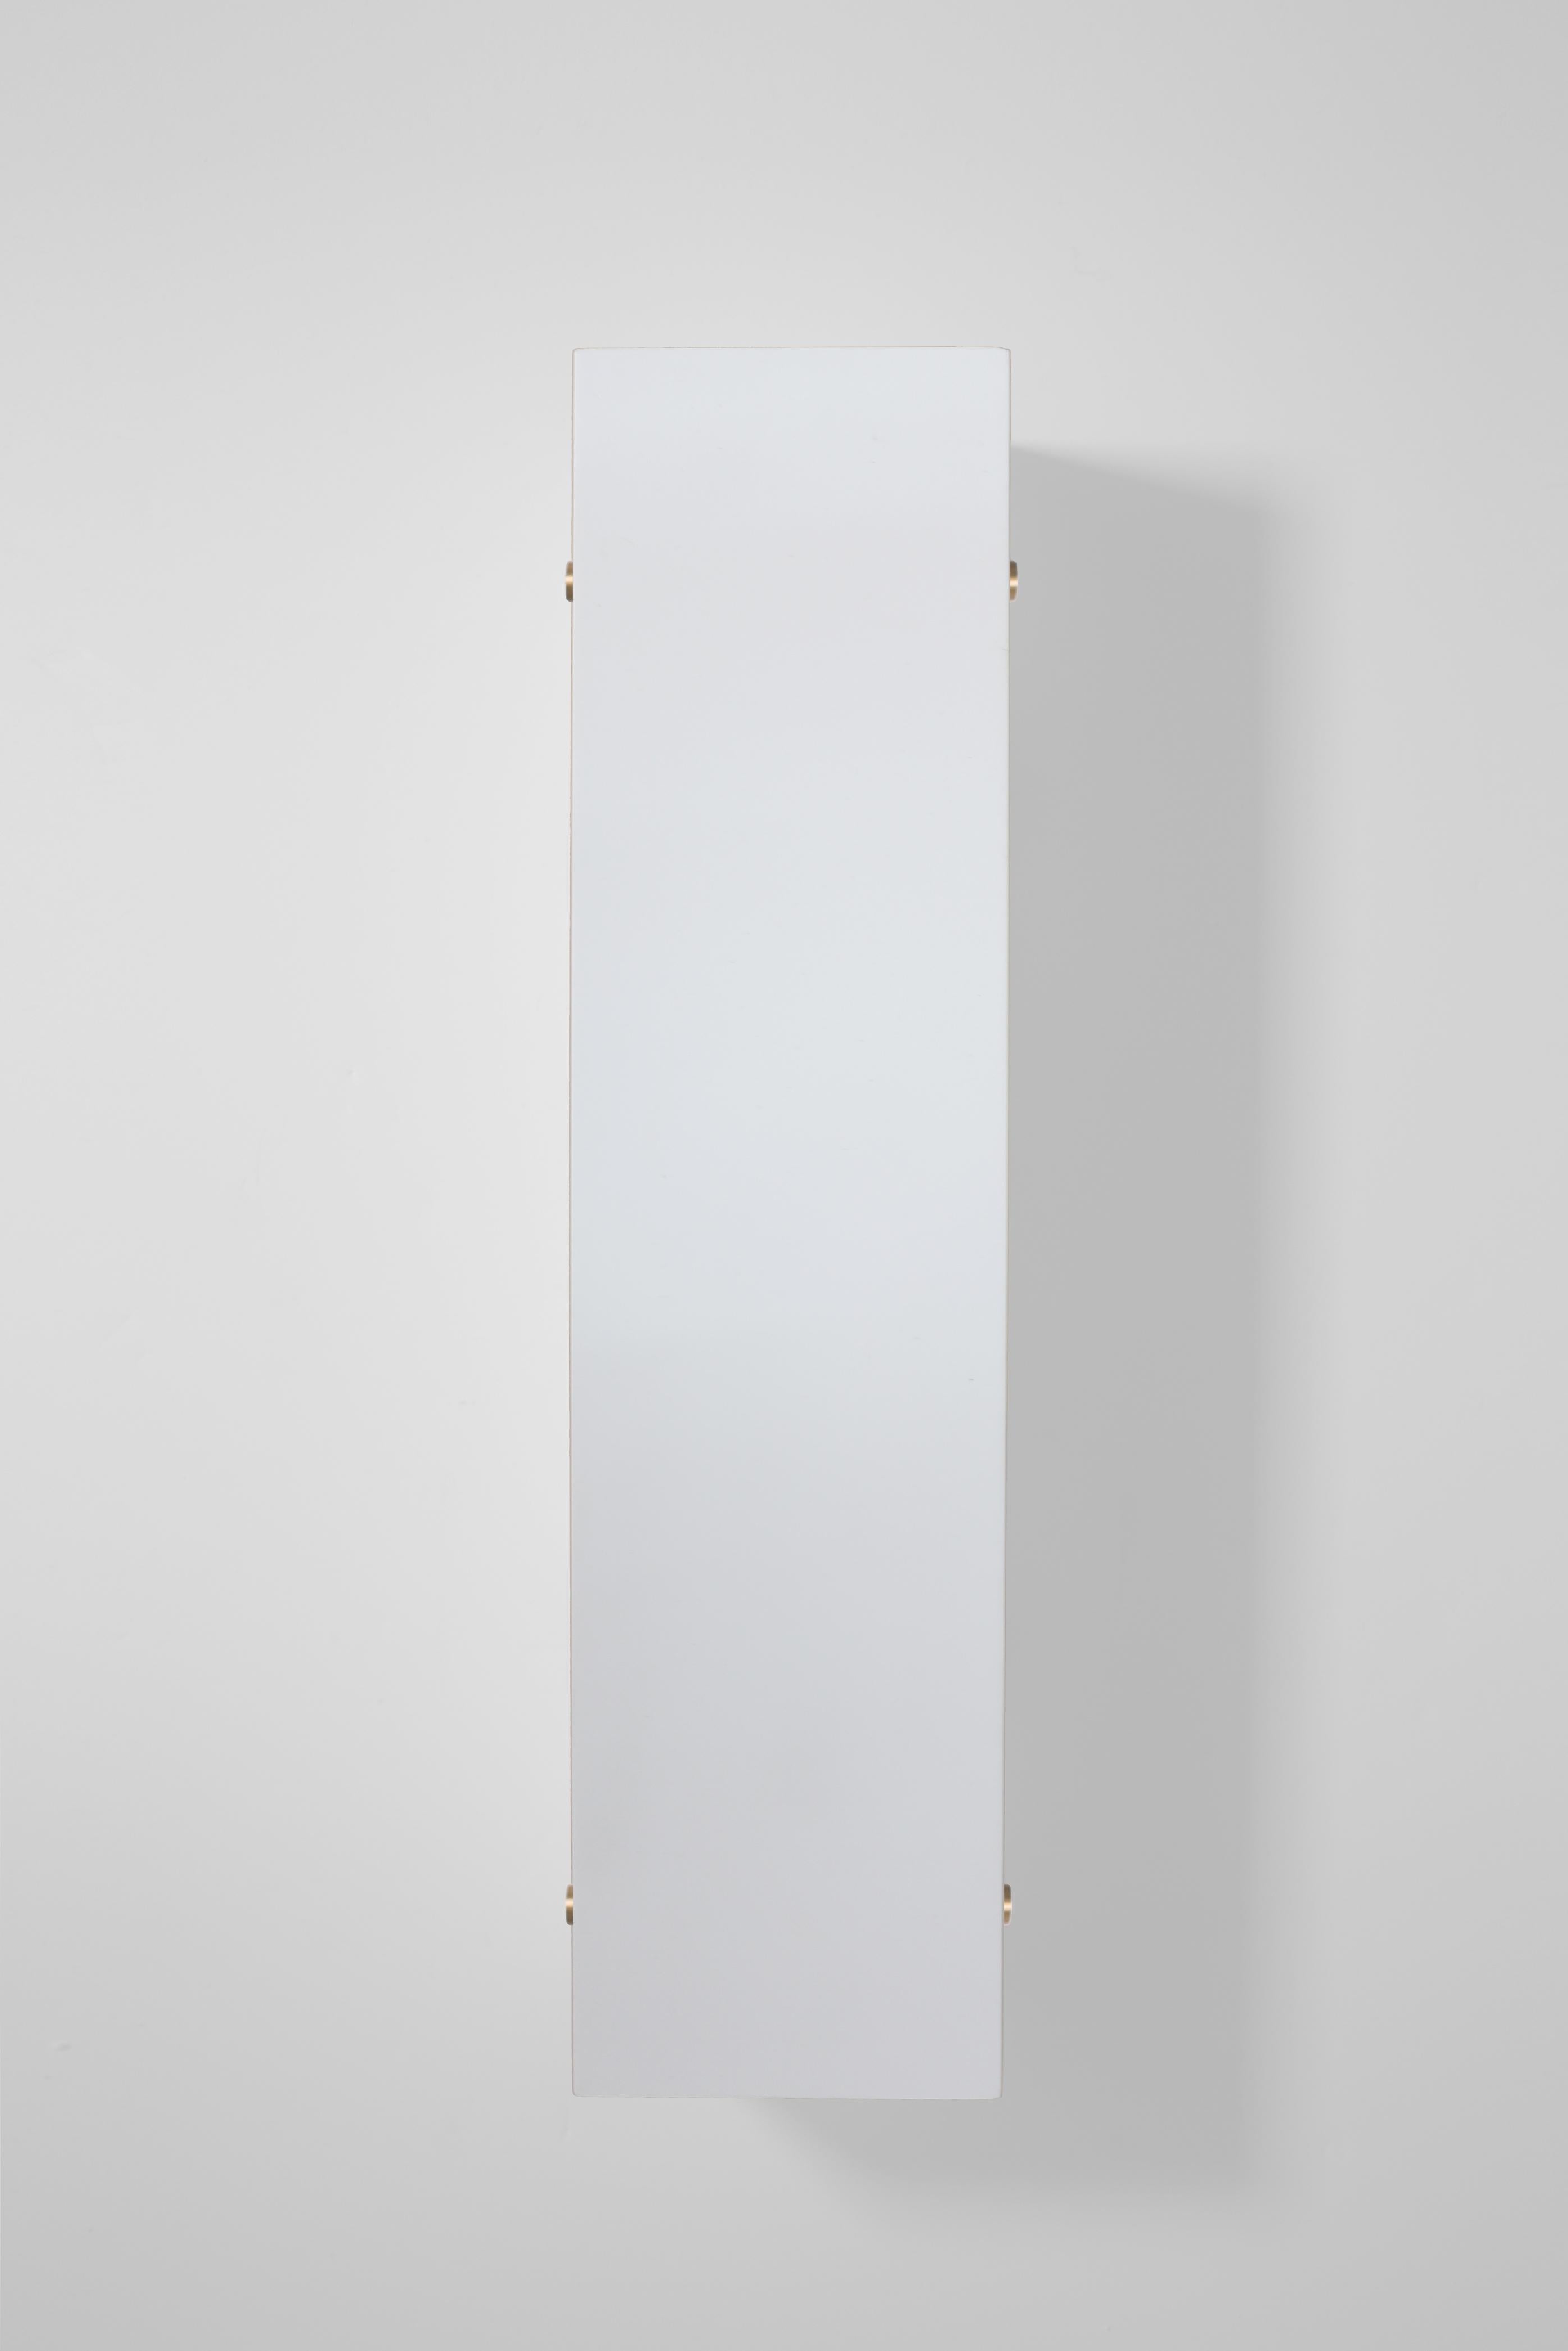 Orphan Work 100PR Sconce
Shown in primed wood with brushed brass.
Prepped for paint, plaster or wallpaper application.
Available in white primer with brushed brass or blackened.
Measures: 19” H x 4 3/4